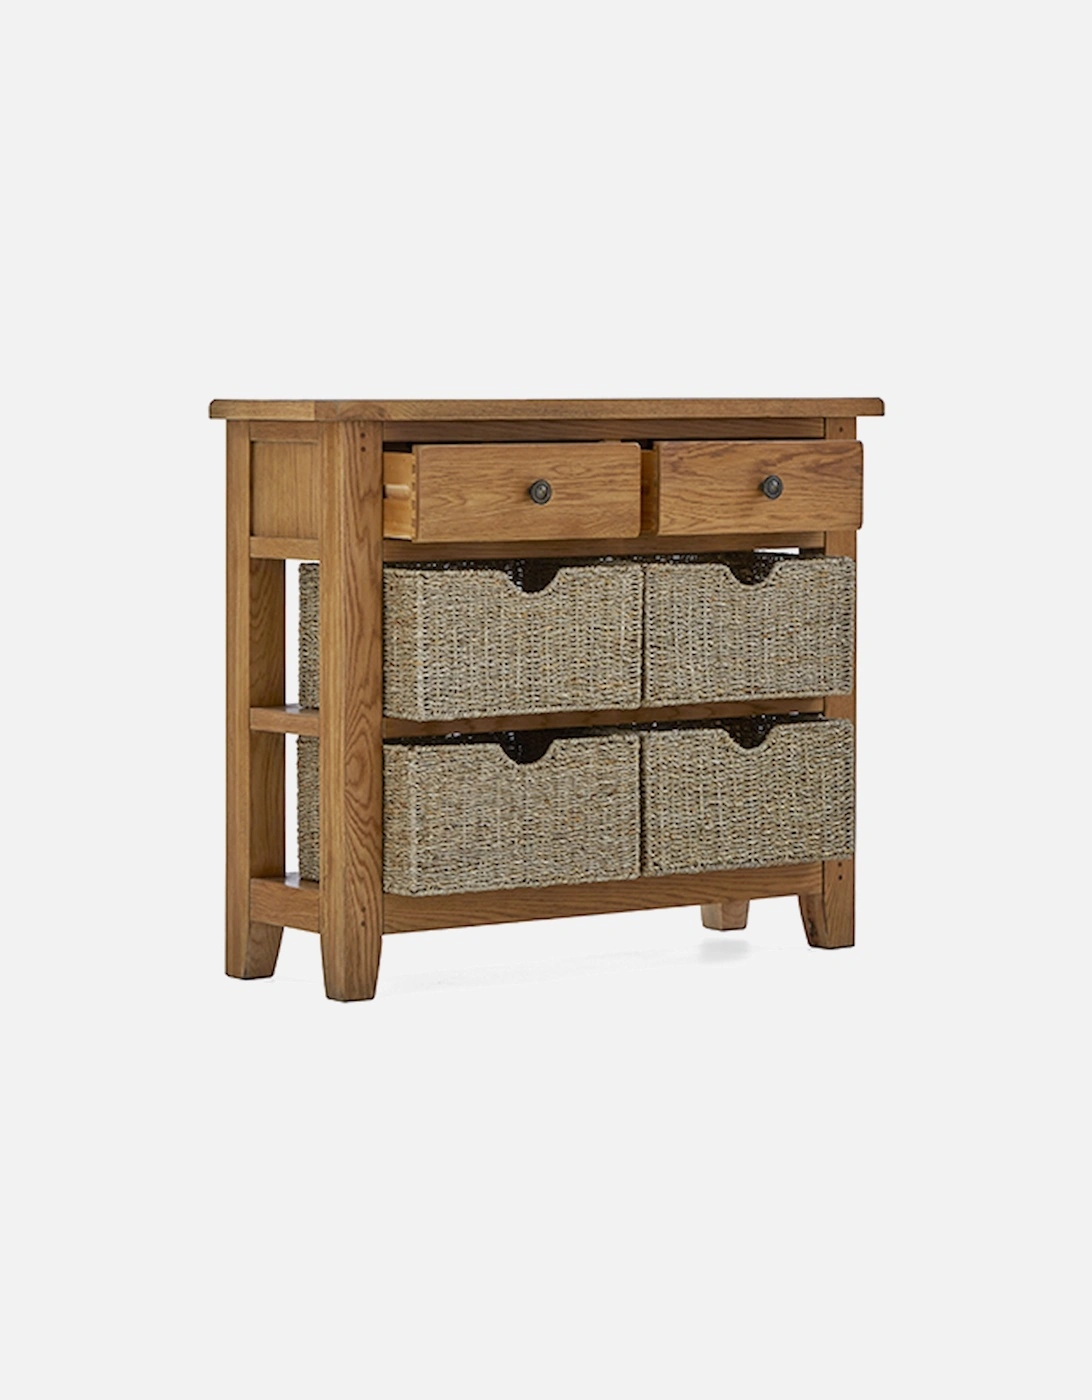 Burford Console Table with Basket